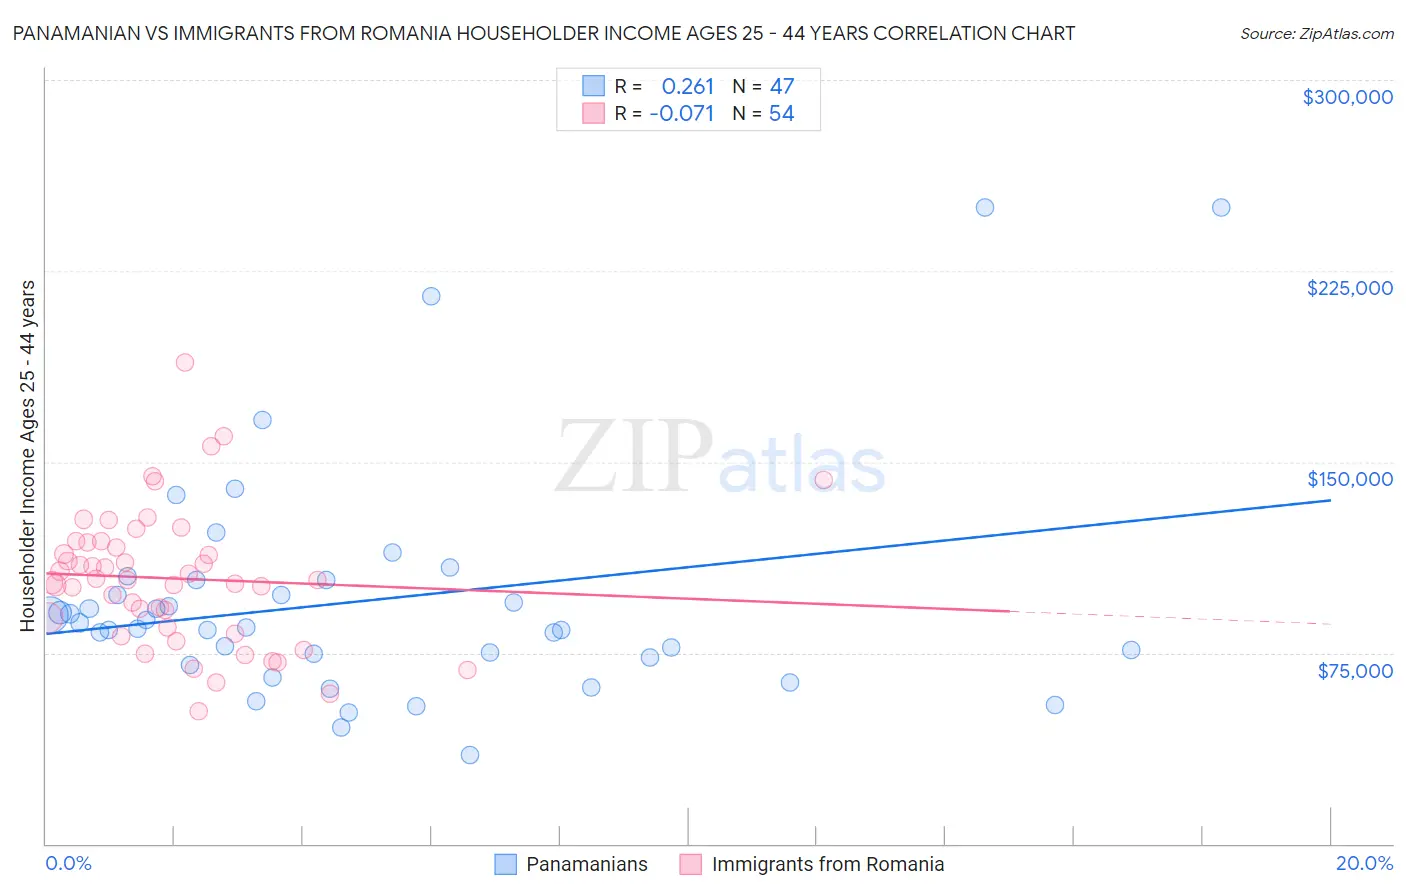 Panamanian vs Immigrants from Romania Householder Income Ages 25 - 44 years